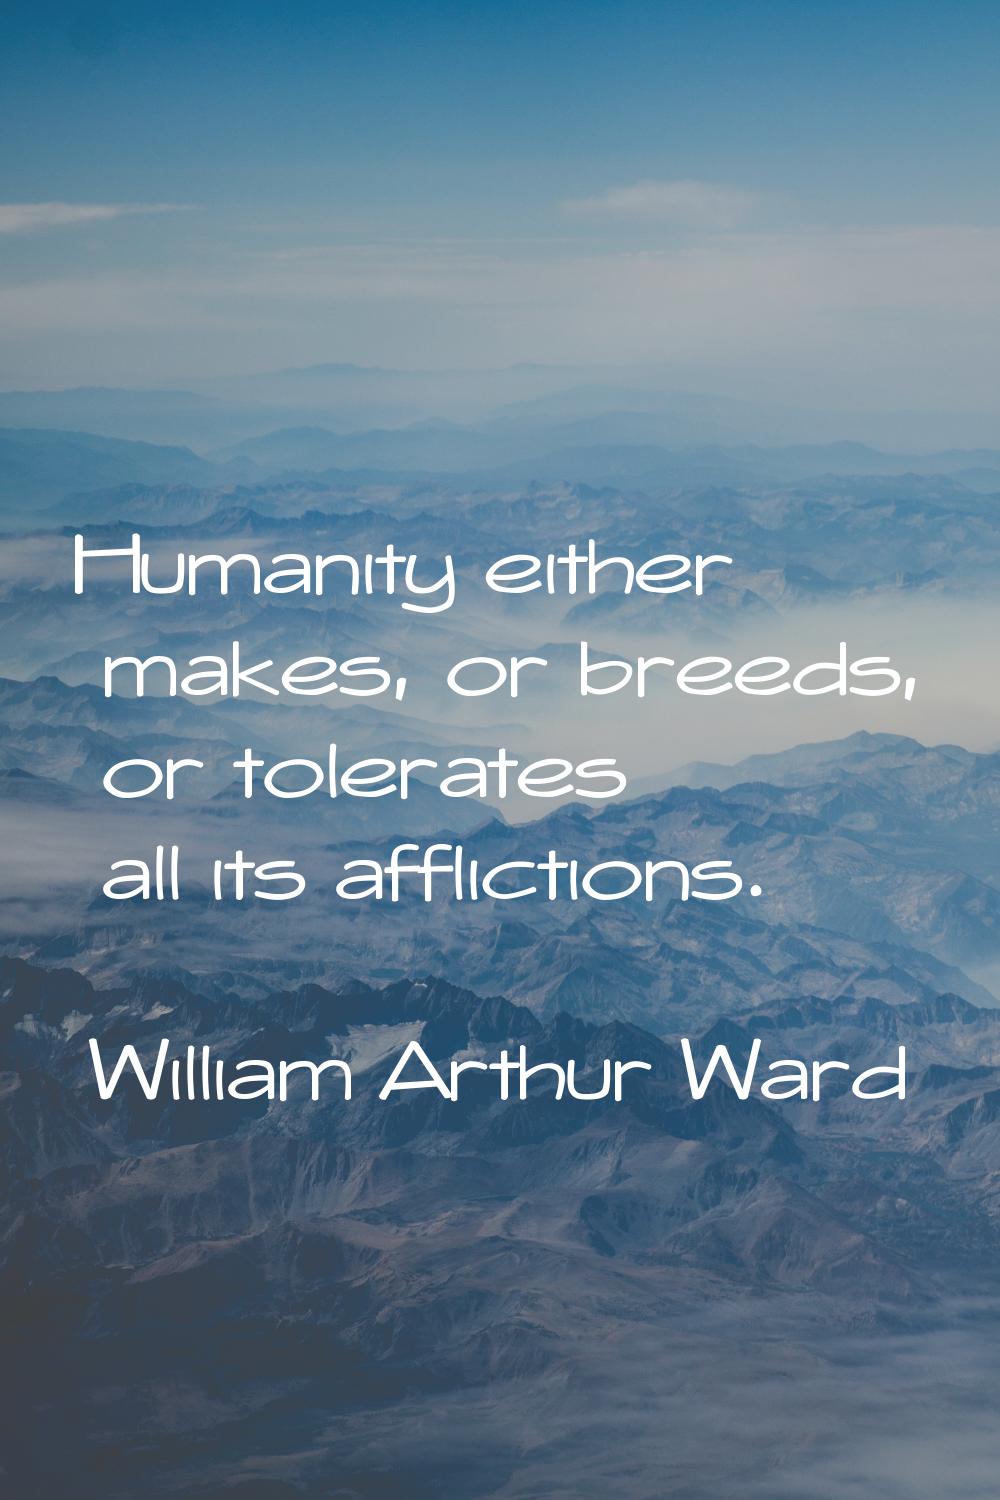 Humanity either makes, or breeds, or tolerates all its afflictions.